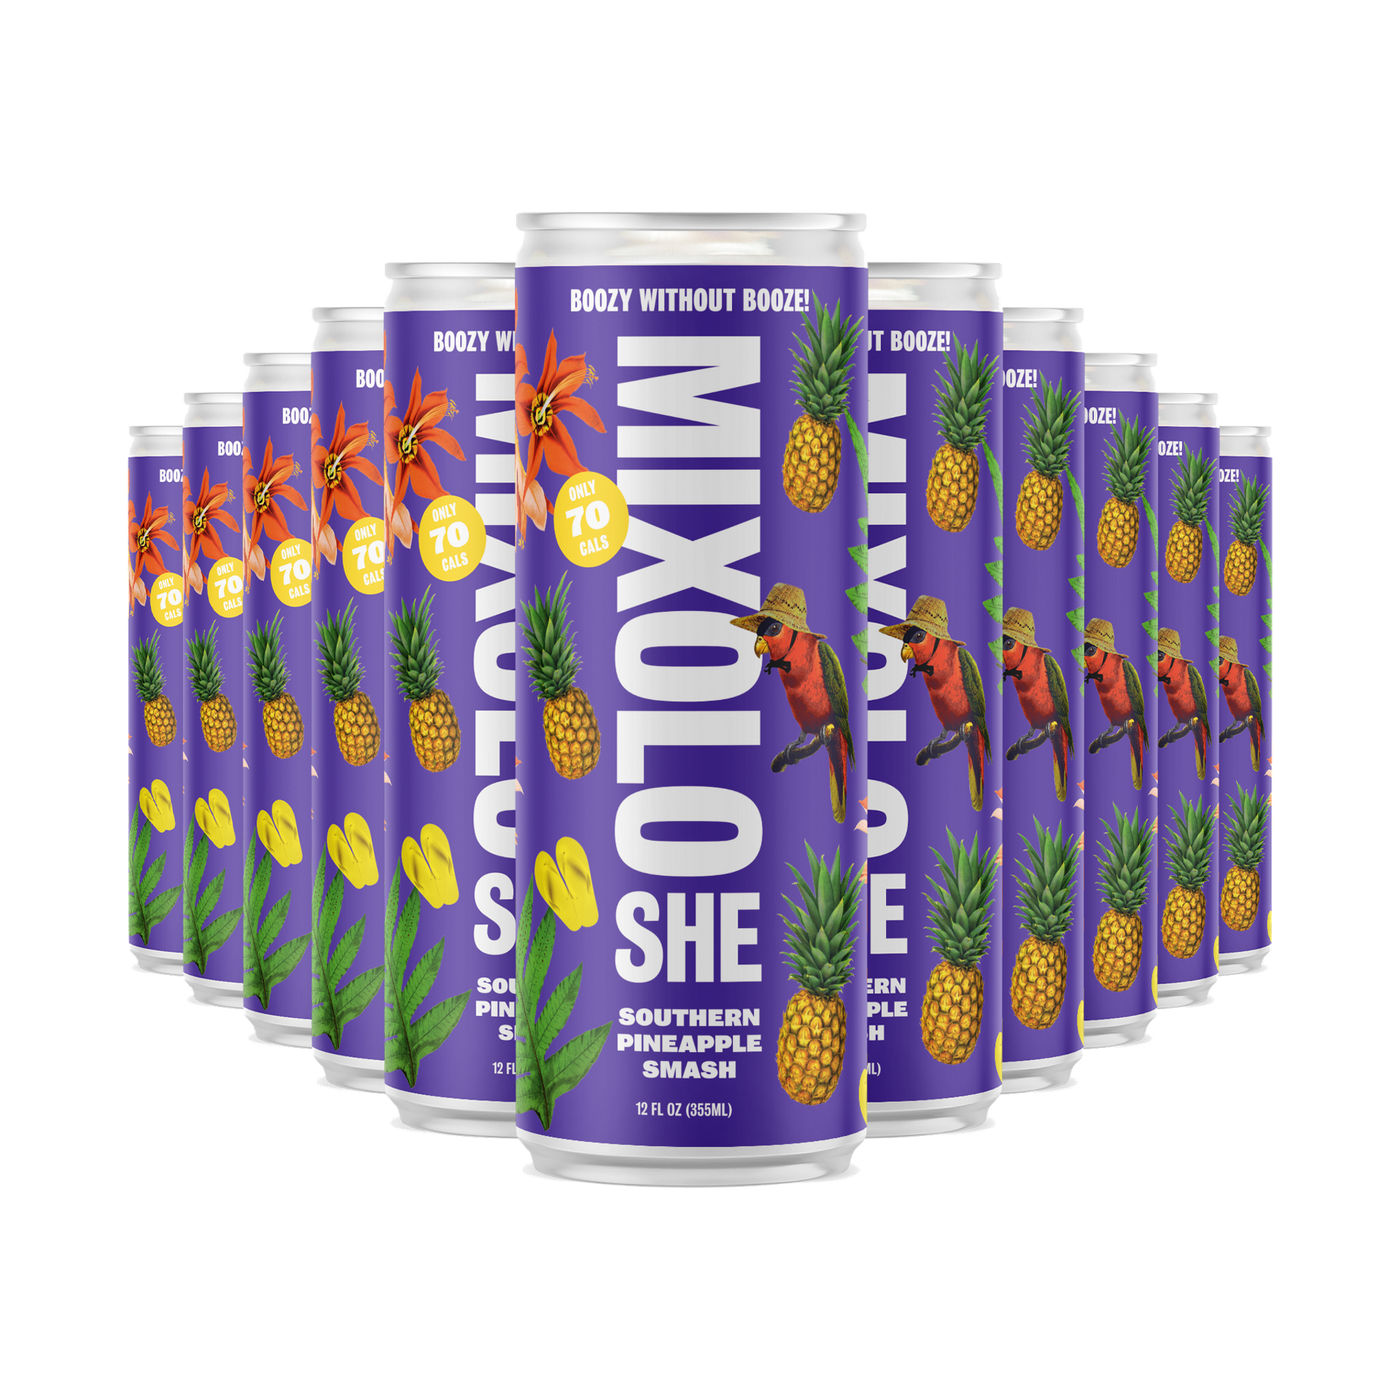 Mixoloshe Southern Pineapple Smash - boozy without booze! - delicious non-alcoholic zero proof cocktail AF alcohol free available at The Sobr Market in Winnipeg with delivery and Canada wide shipping Individual and 4 Packs